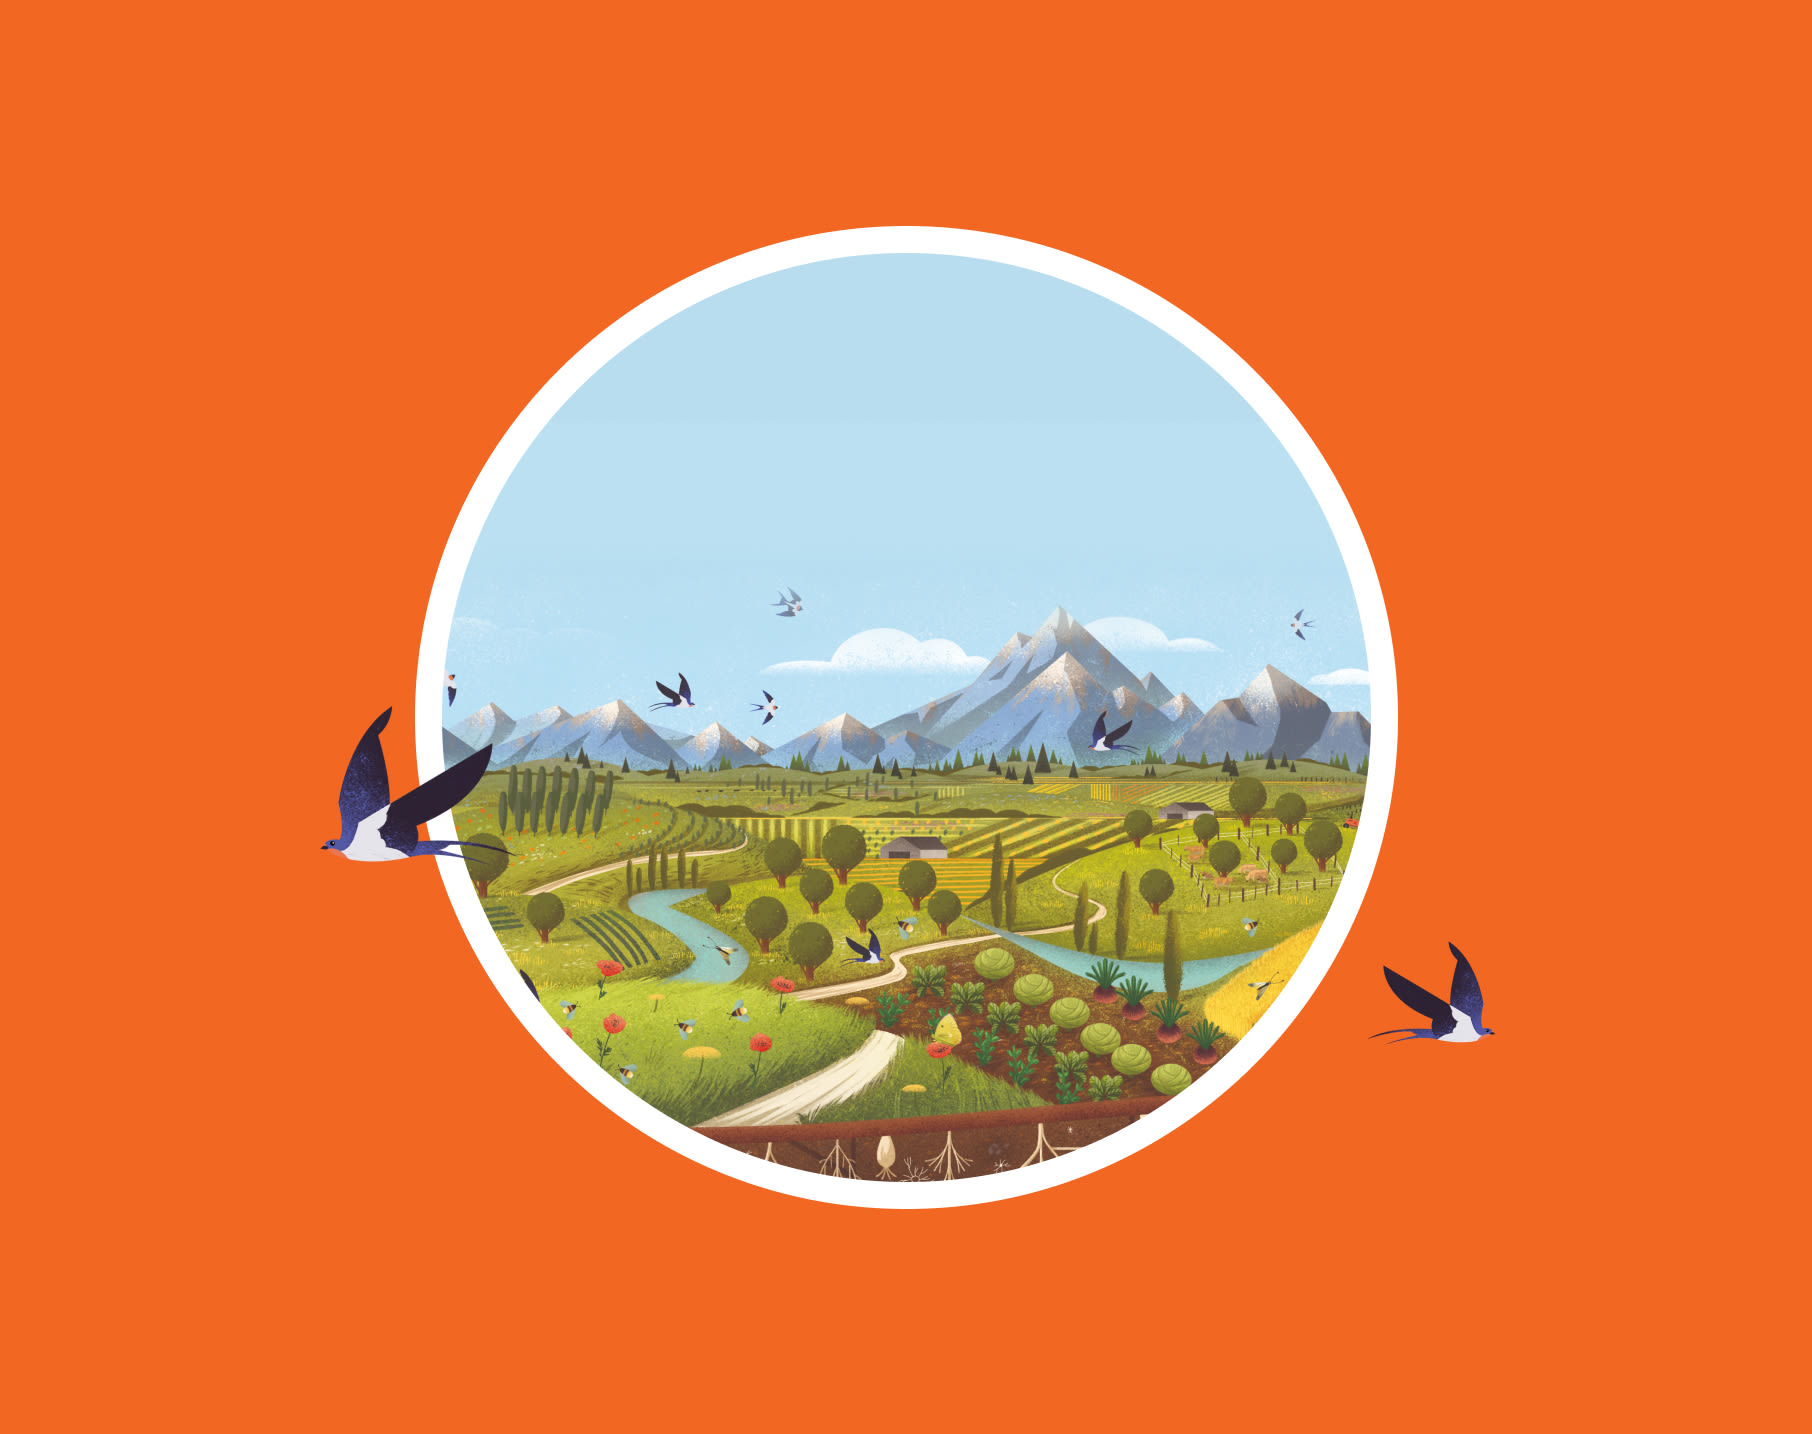 Orange background with circle in the middle. Inside the circle is an illustration of fields and mountains.